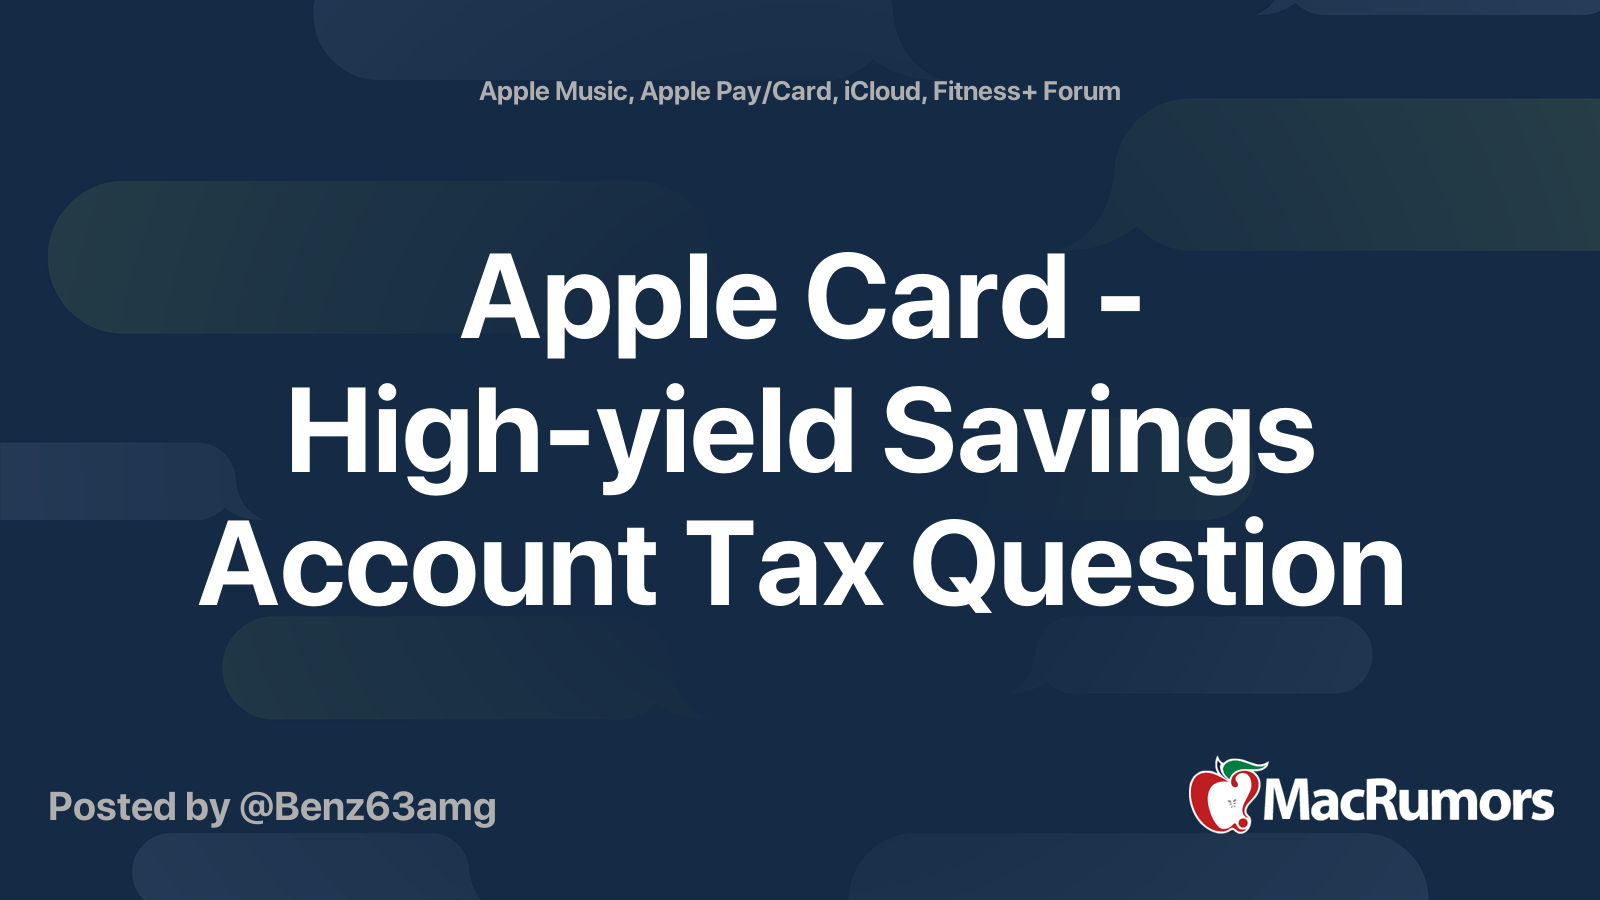 Apple Card's new high-yield Savings account is now available